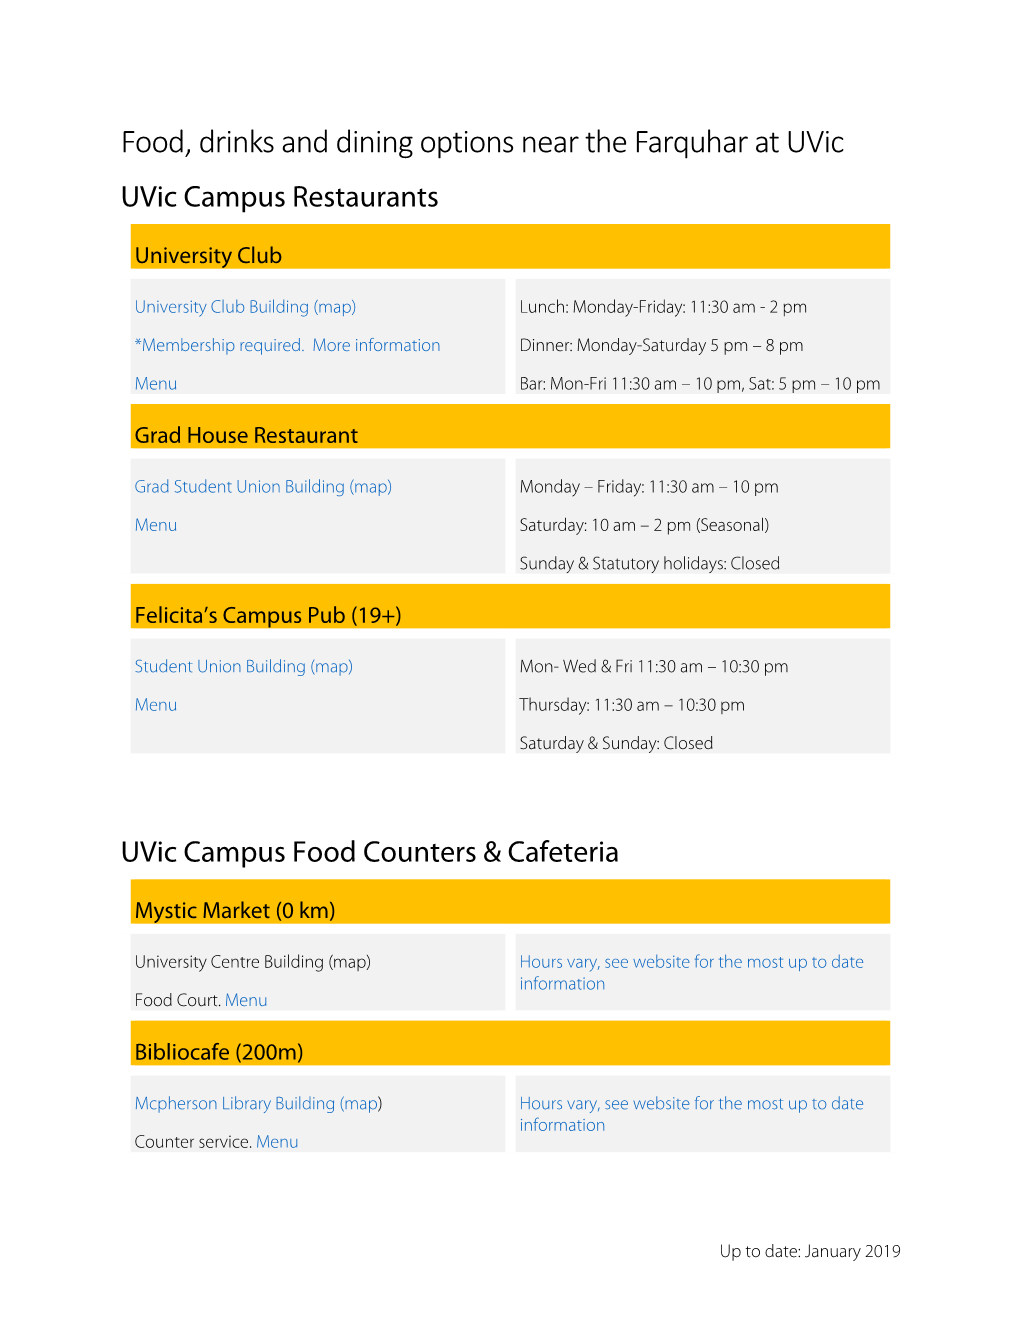 Food, Drinks and Dining Options Near the Farquhar at Uvic Uvic Campus Restaurants